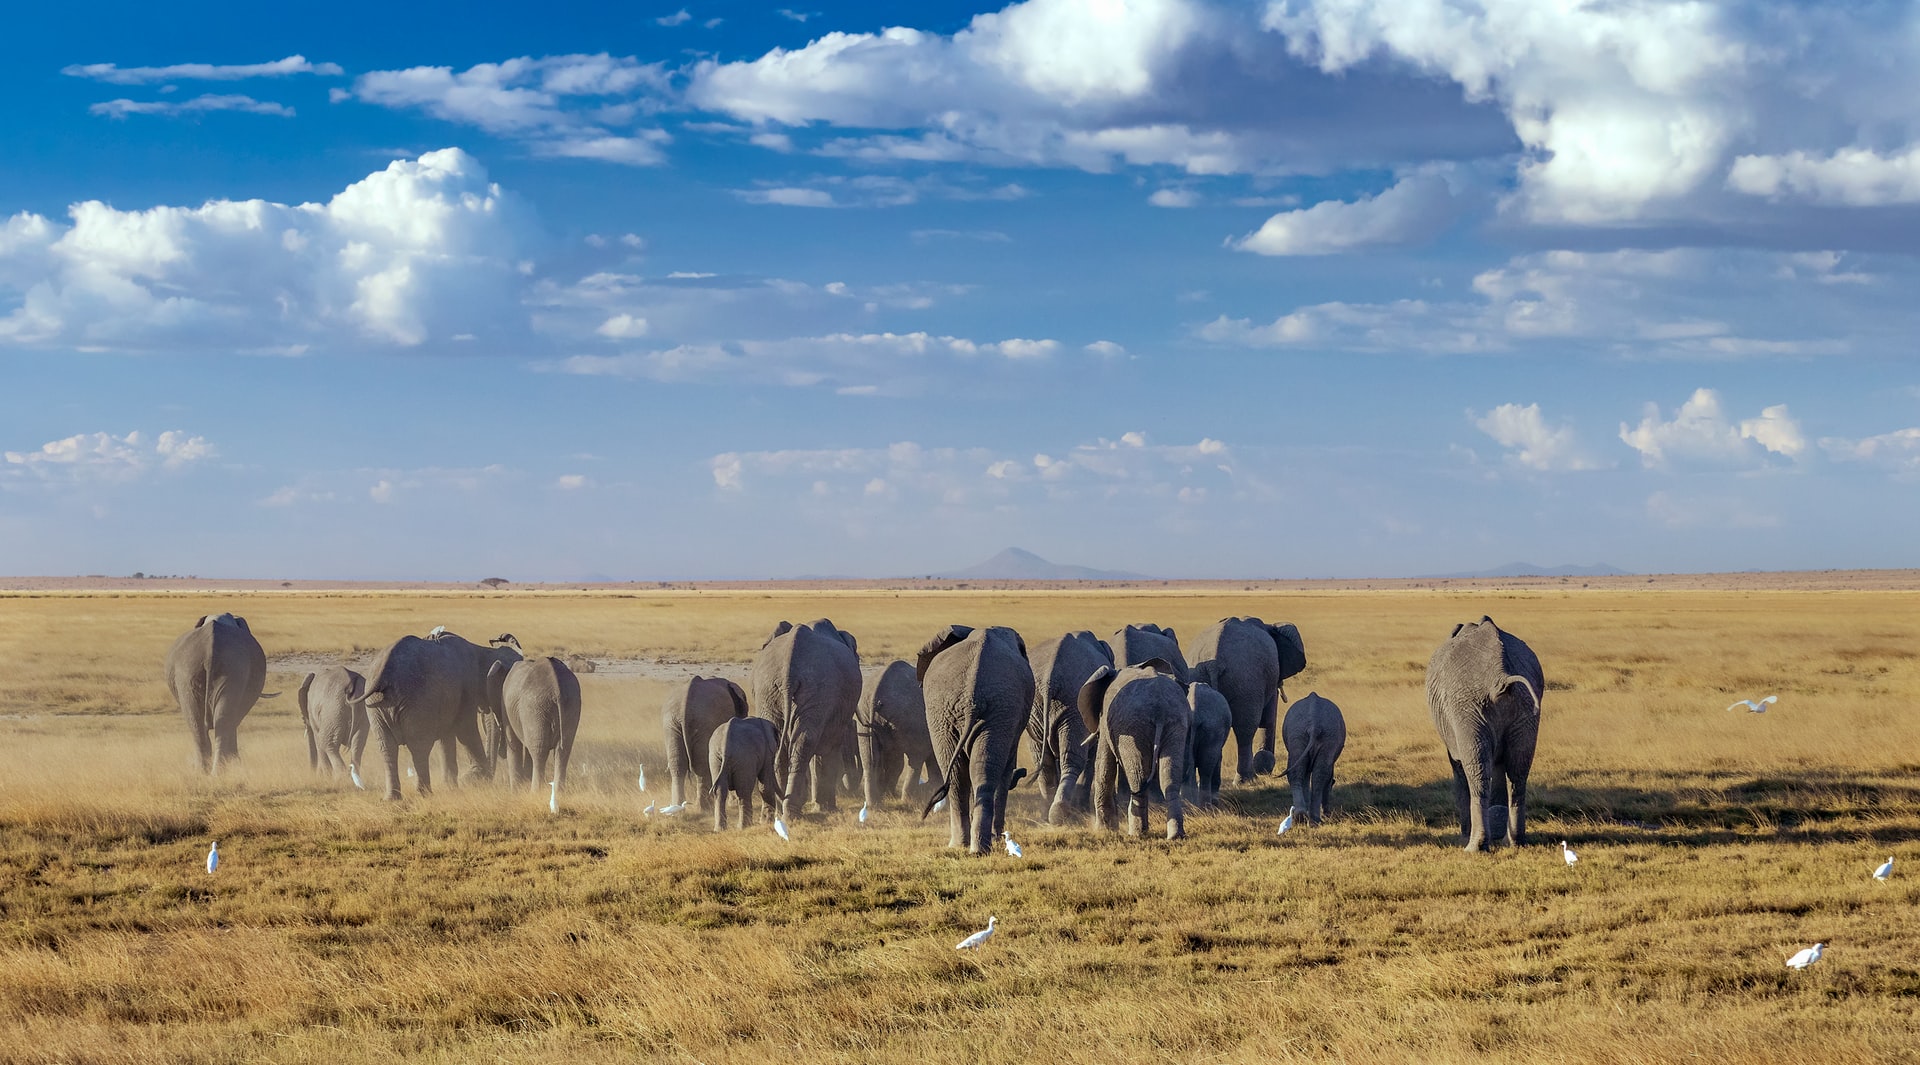 Along with Kenya's efforts to tame poaching, a combination of good rainfall and a drop in tourism due to lockdowns has led to the birth of 140 baby elephants in Amboseli National Park, bringing Kenya's overall elephant population to more than double that of 1989.